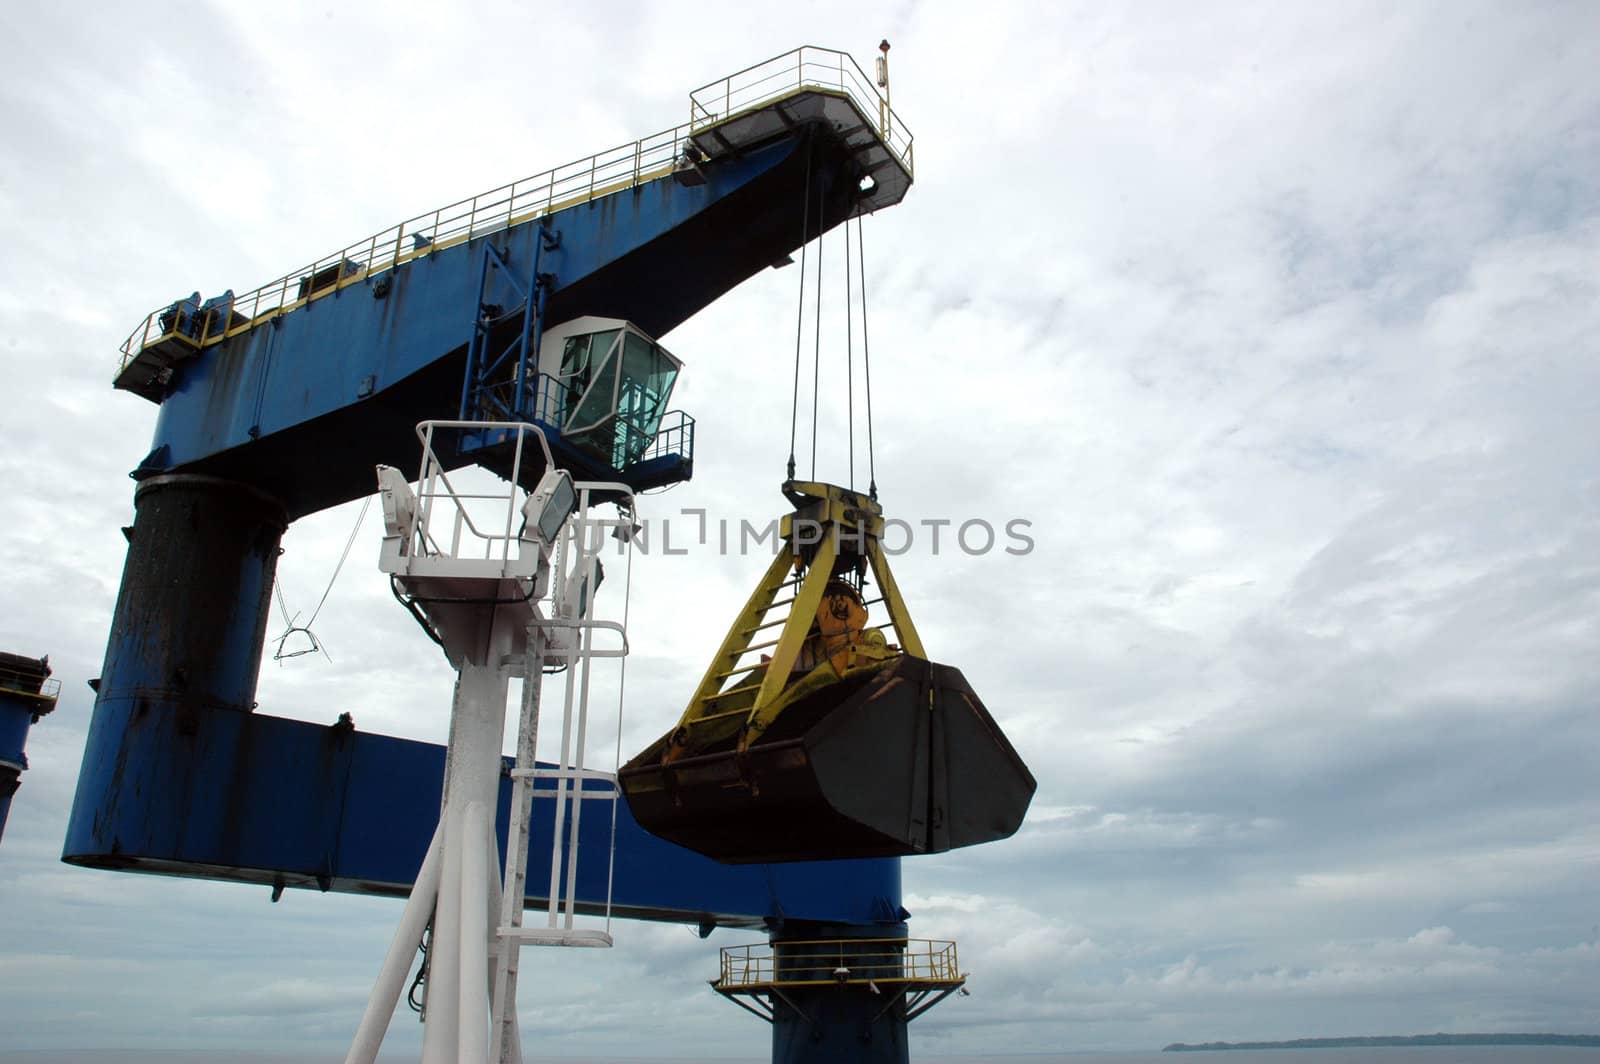 coal is being loaded onto tankers with a blue crane by antonihalim